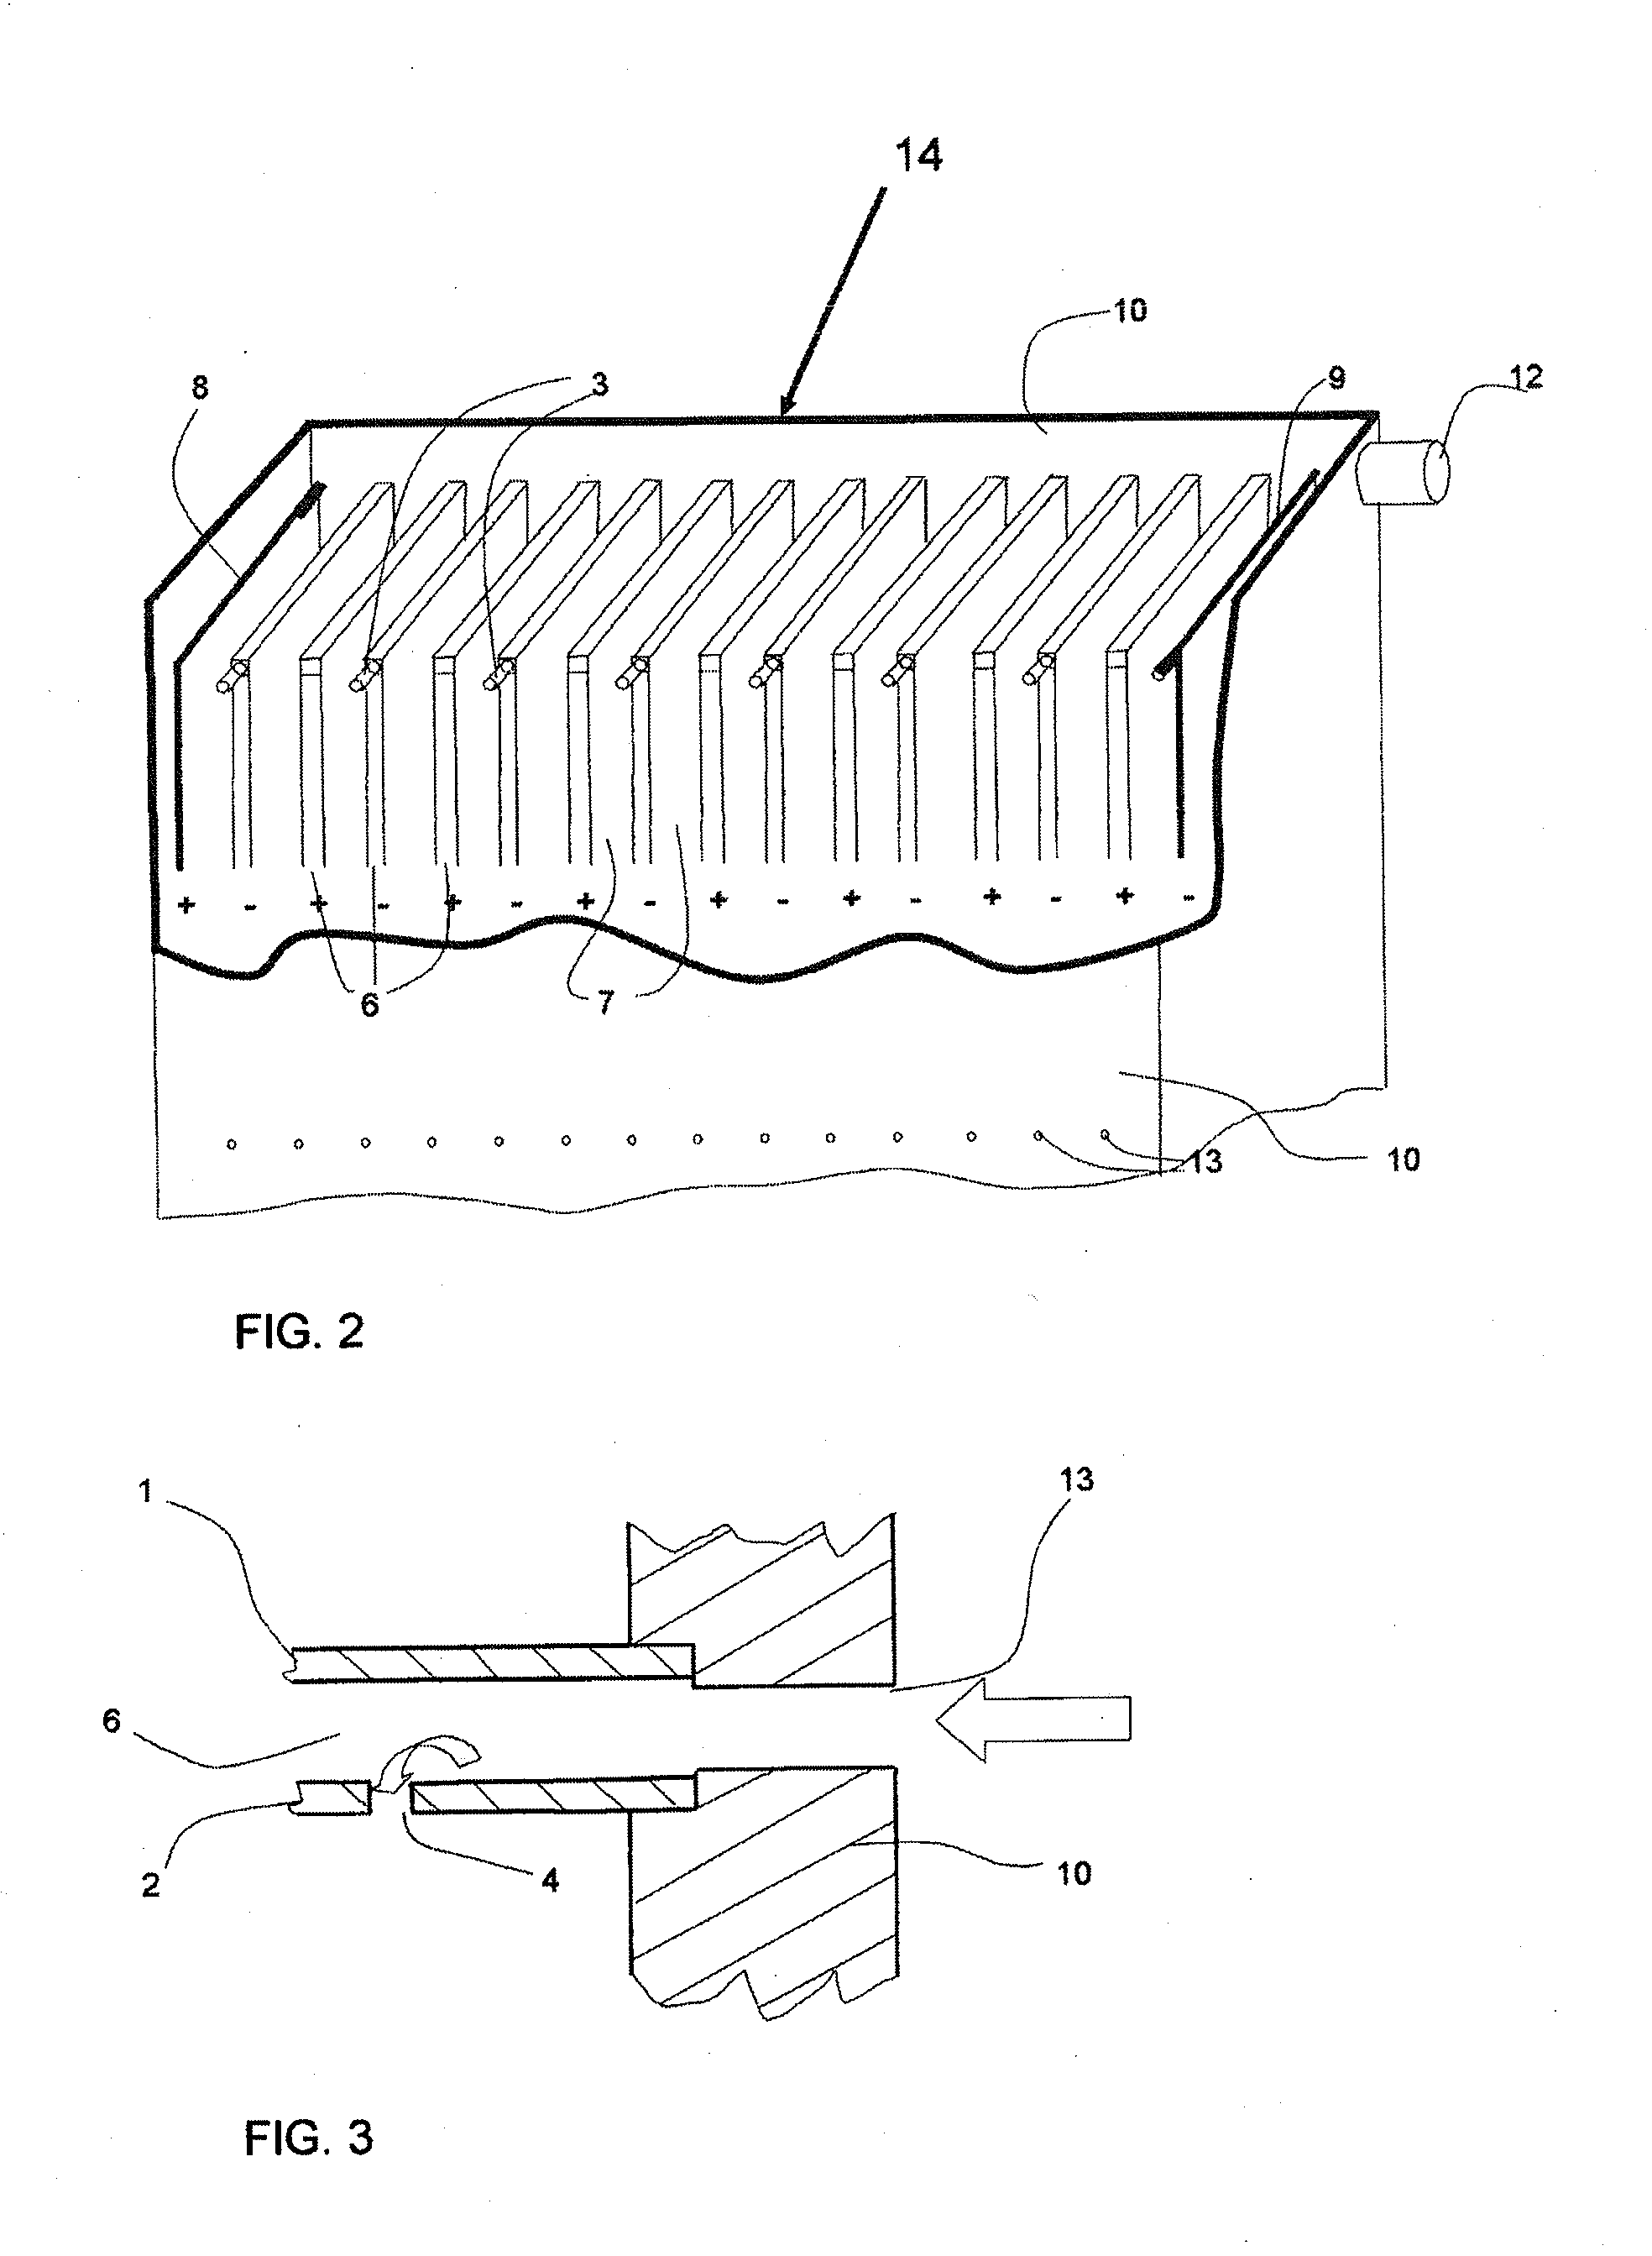 Method and apparatus for electrochemical treatment of contaminated water or wastewater